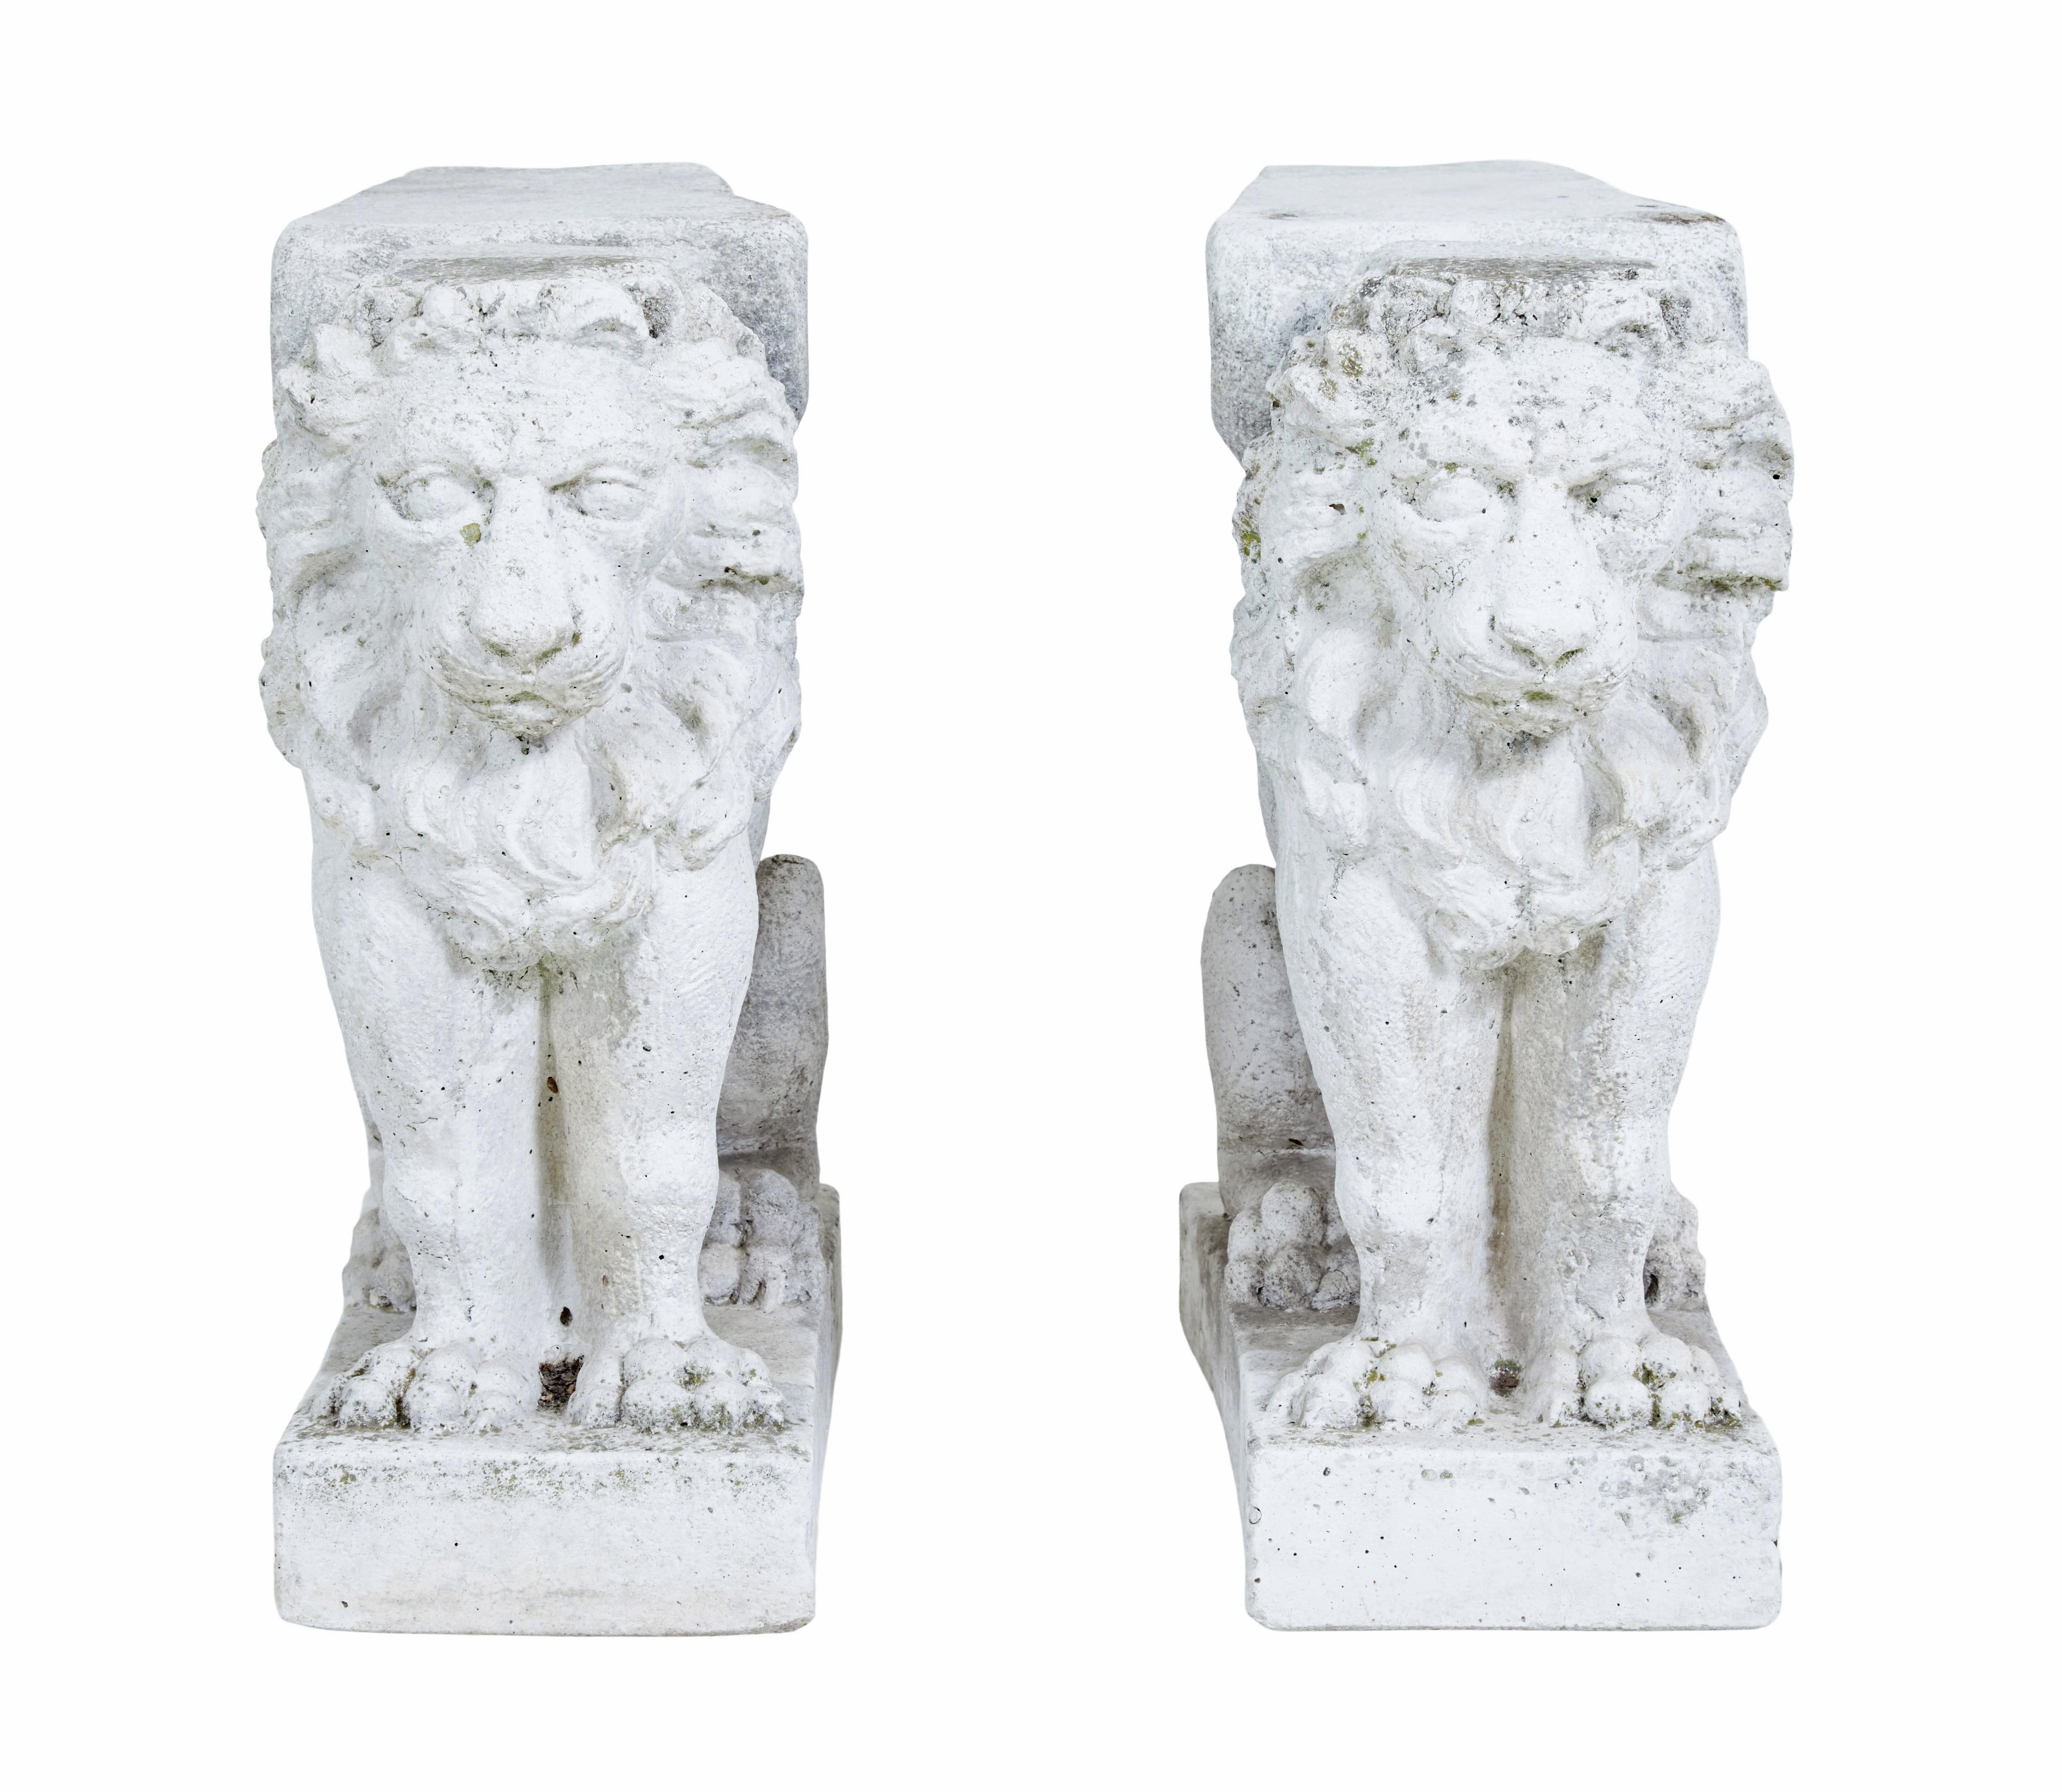 Pair of early 20th century stone garden lion pedestals circa 1920.

Here we have a great pair of architectural stone lions which act as pedestals for a low garden bench with the addition of some woodwork.  Could work equally well as pair pedestals